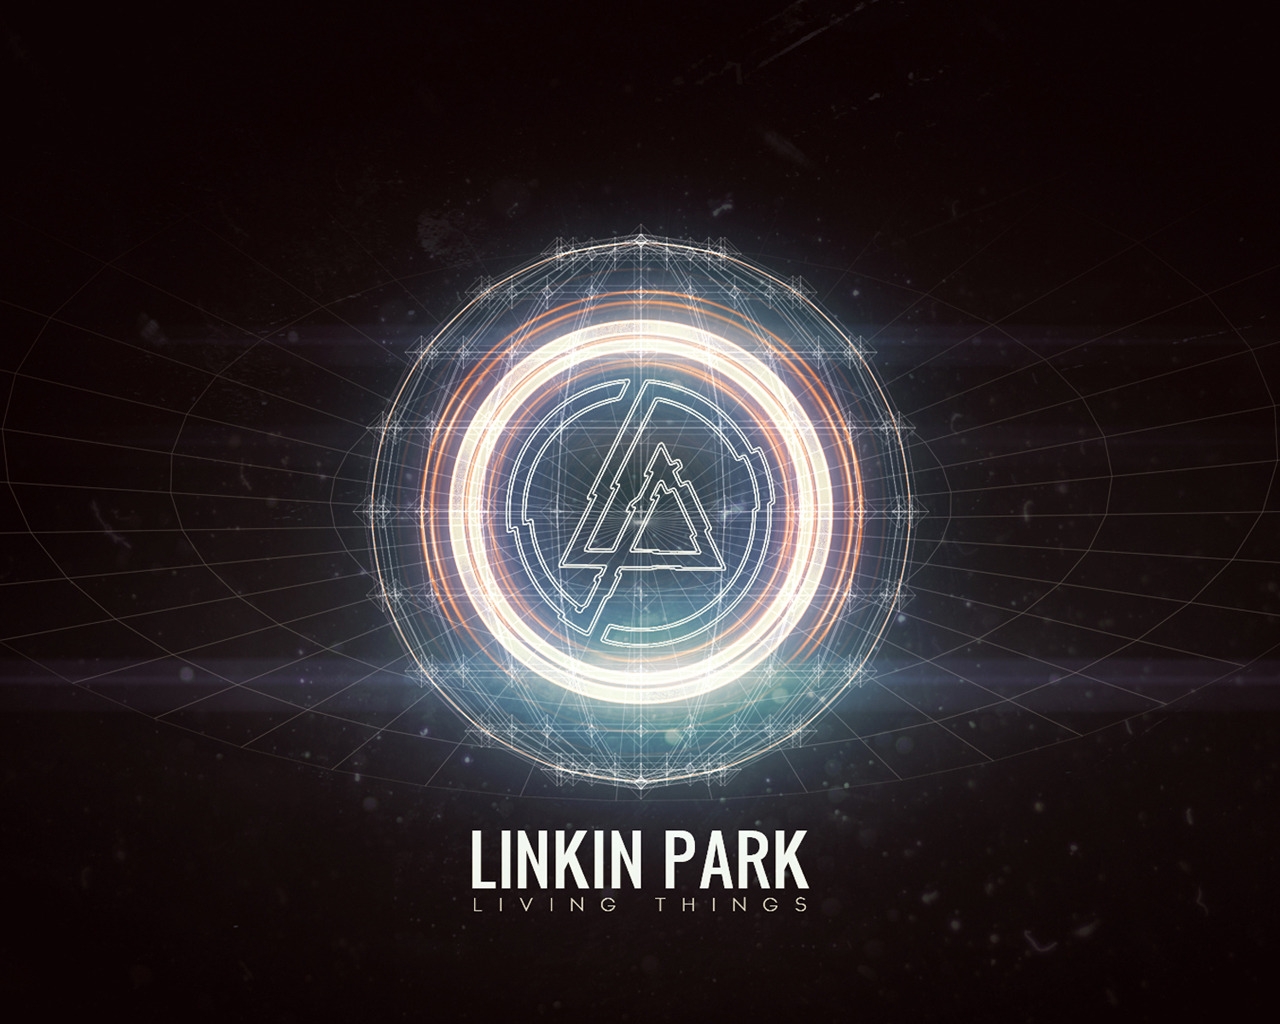 Linkin Park Living Things for 1280 x 1024 resolution